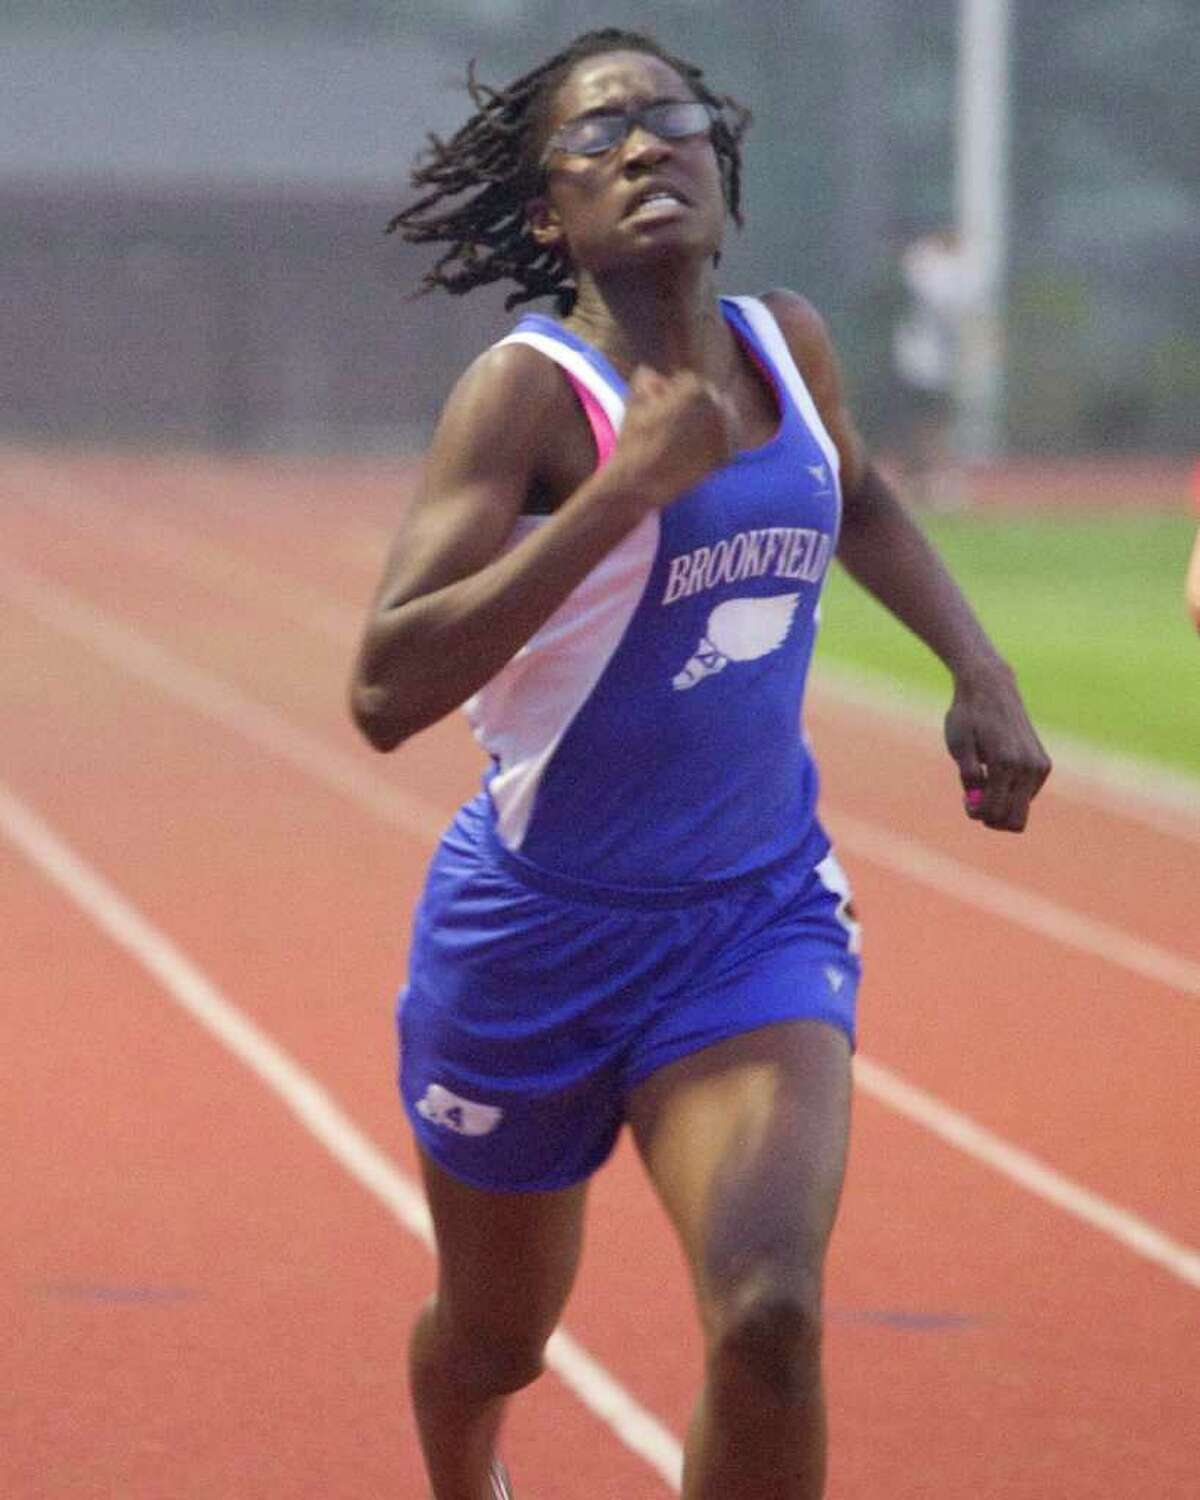 Brookfield's Djenne Parris wins the 200 meters at the SWC Track and Field Championships Monday at Bethel High School.